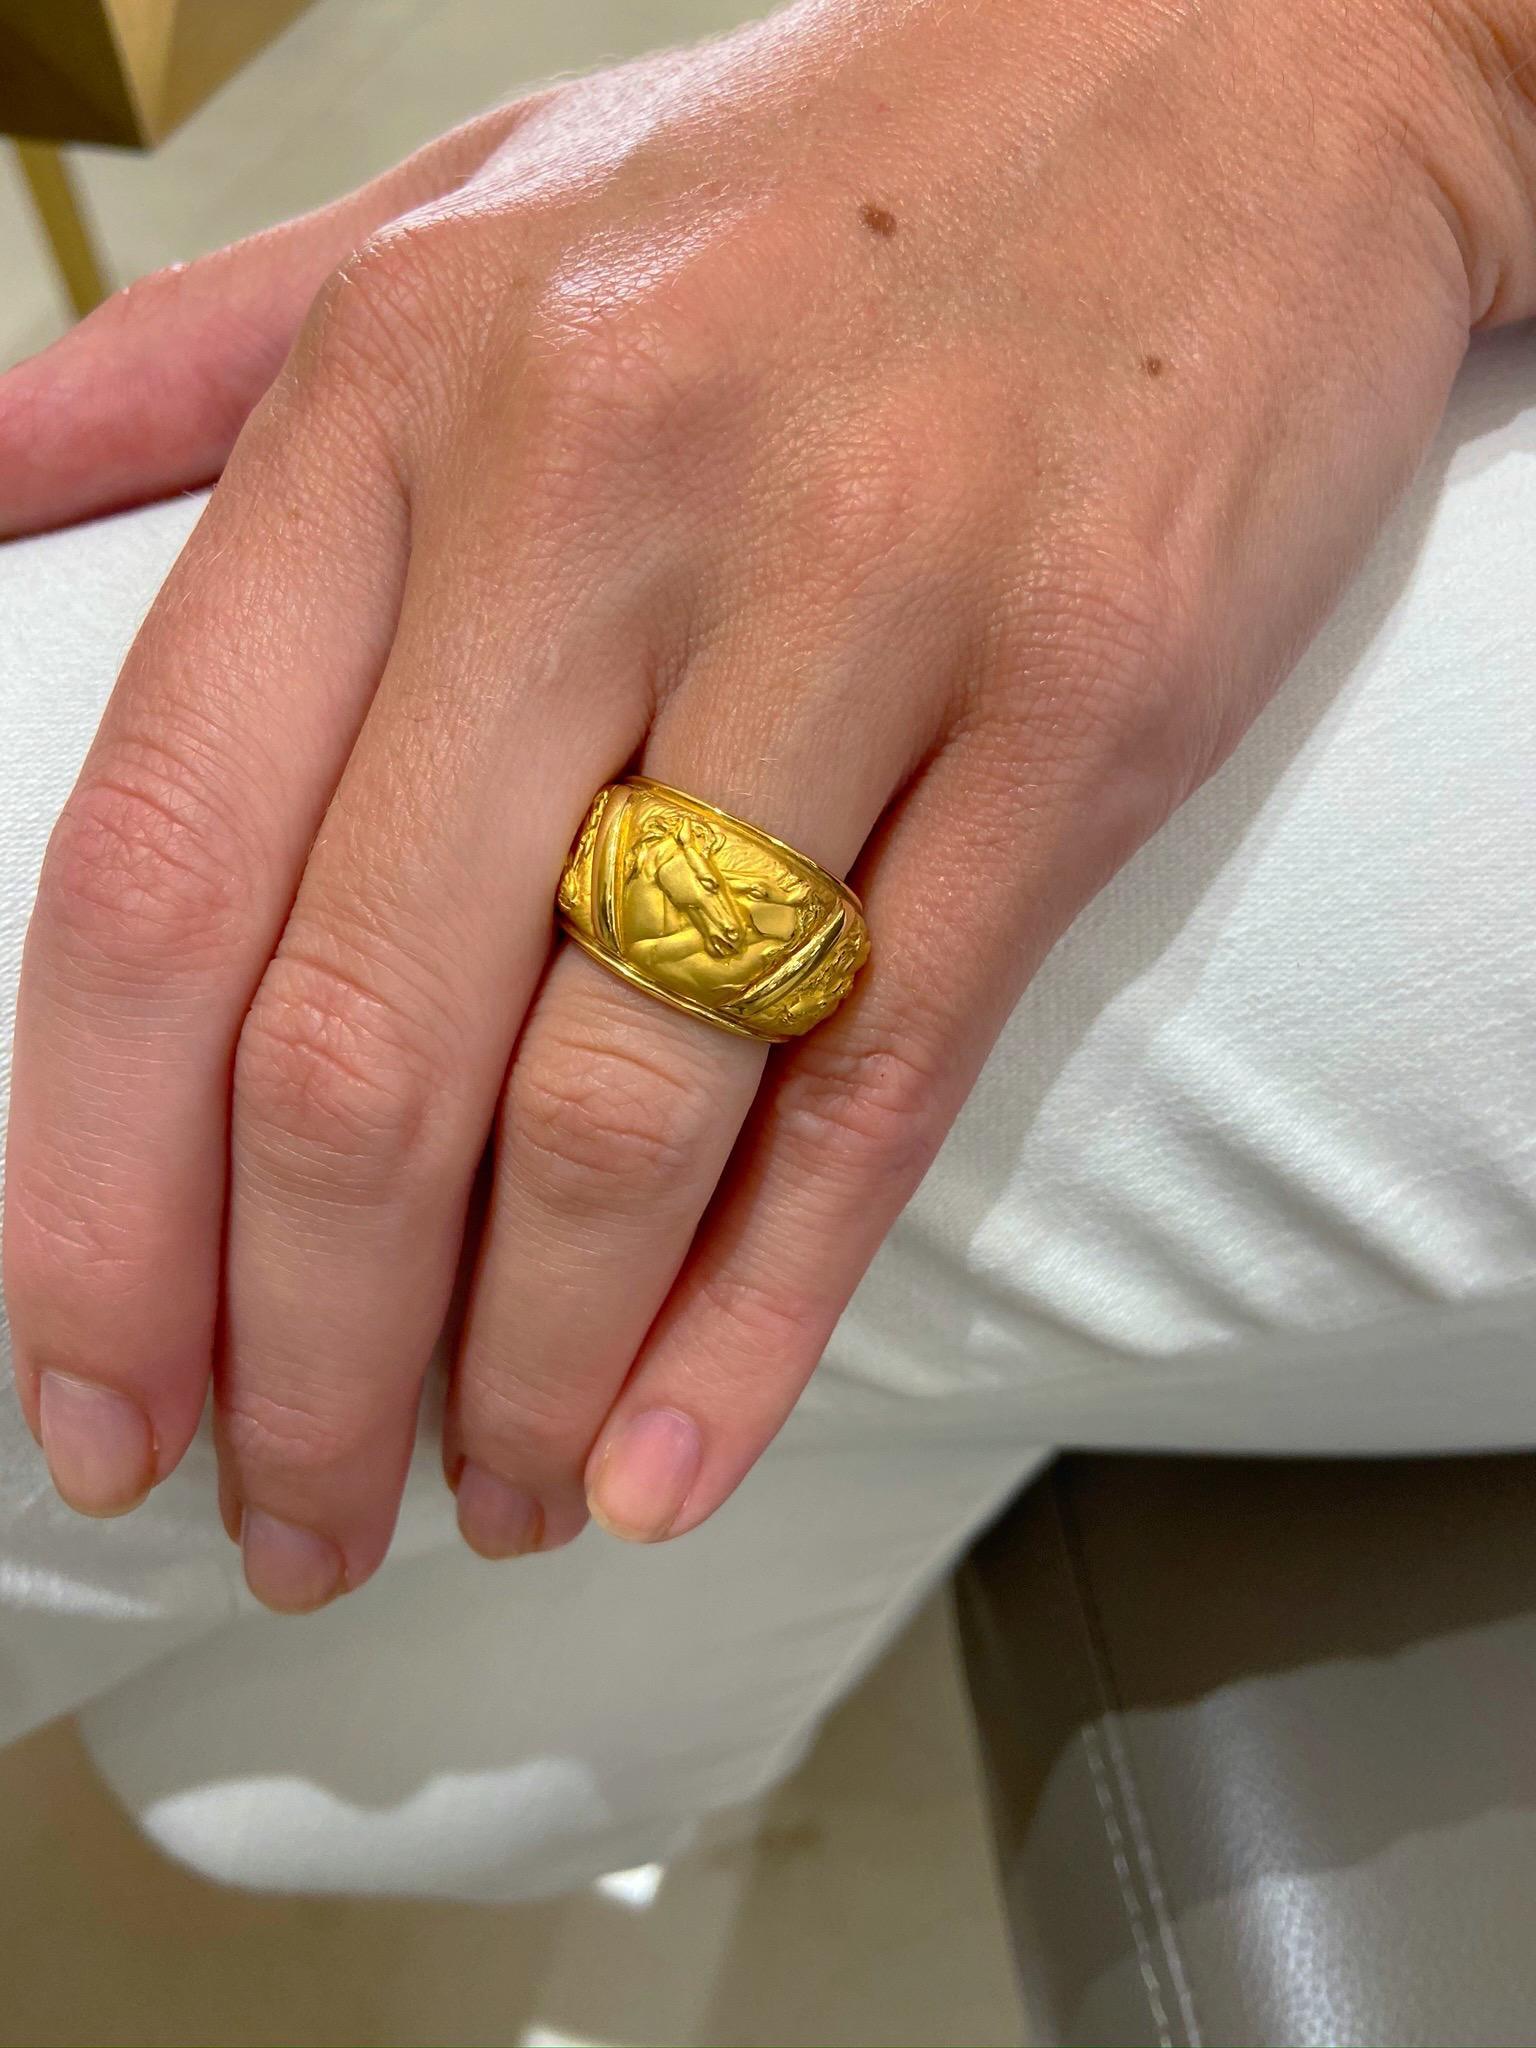 Carrera Y Carrera has built its its famous name on figurative designs, an obsession with surface finishes, and a compelling way of seeing beauty in art and nature.
This 18 karat yellow gold ring from the Mosaico collection is the perfect example of